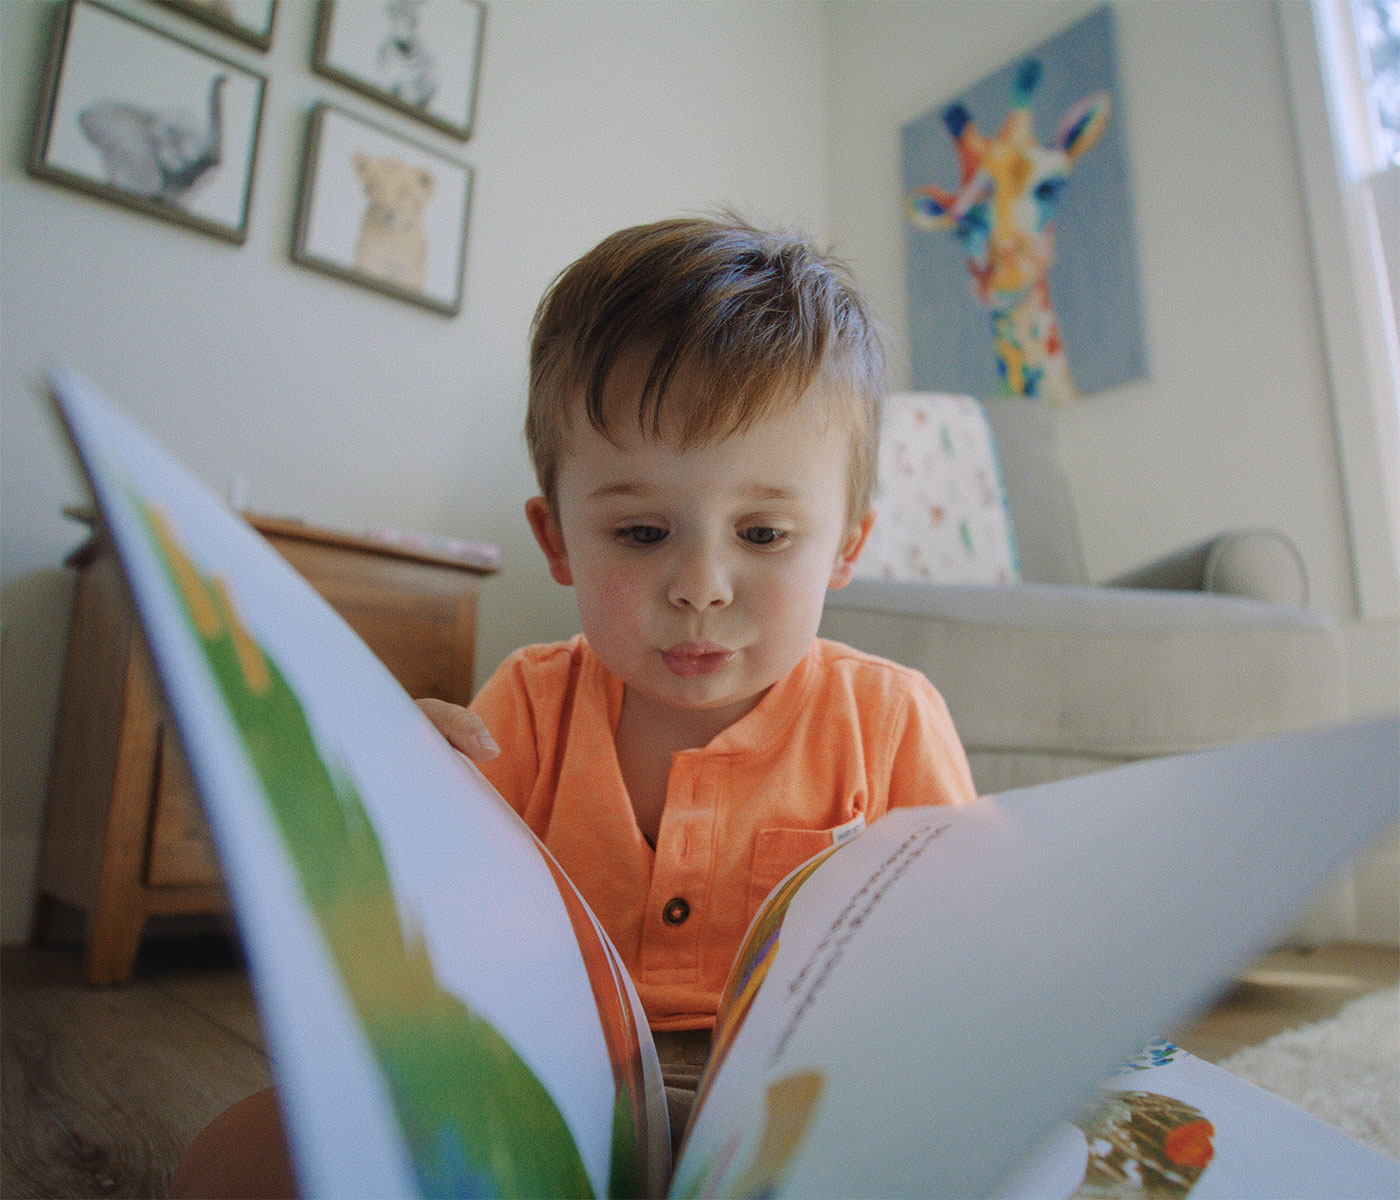 A toddler wearing a sunny orange shirt reads a book on the floor of his bedroom